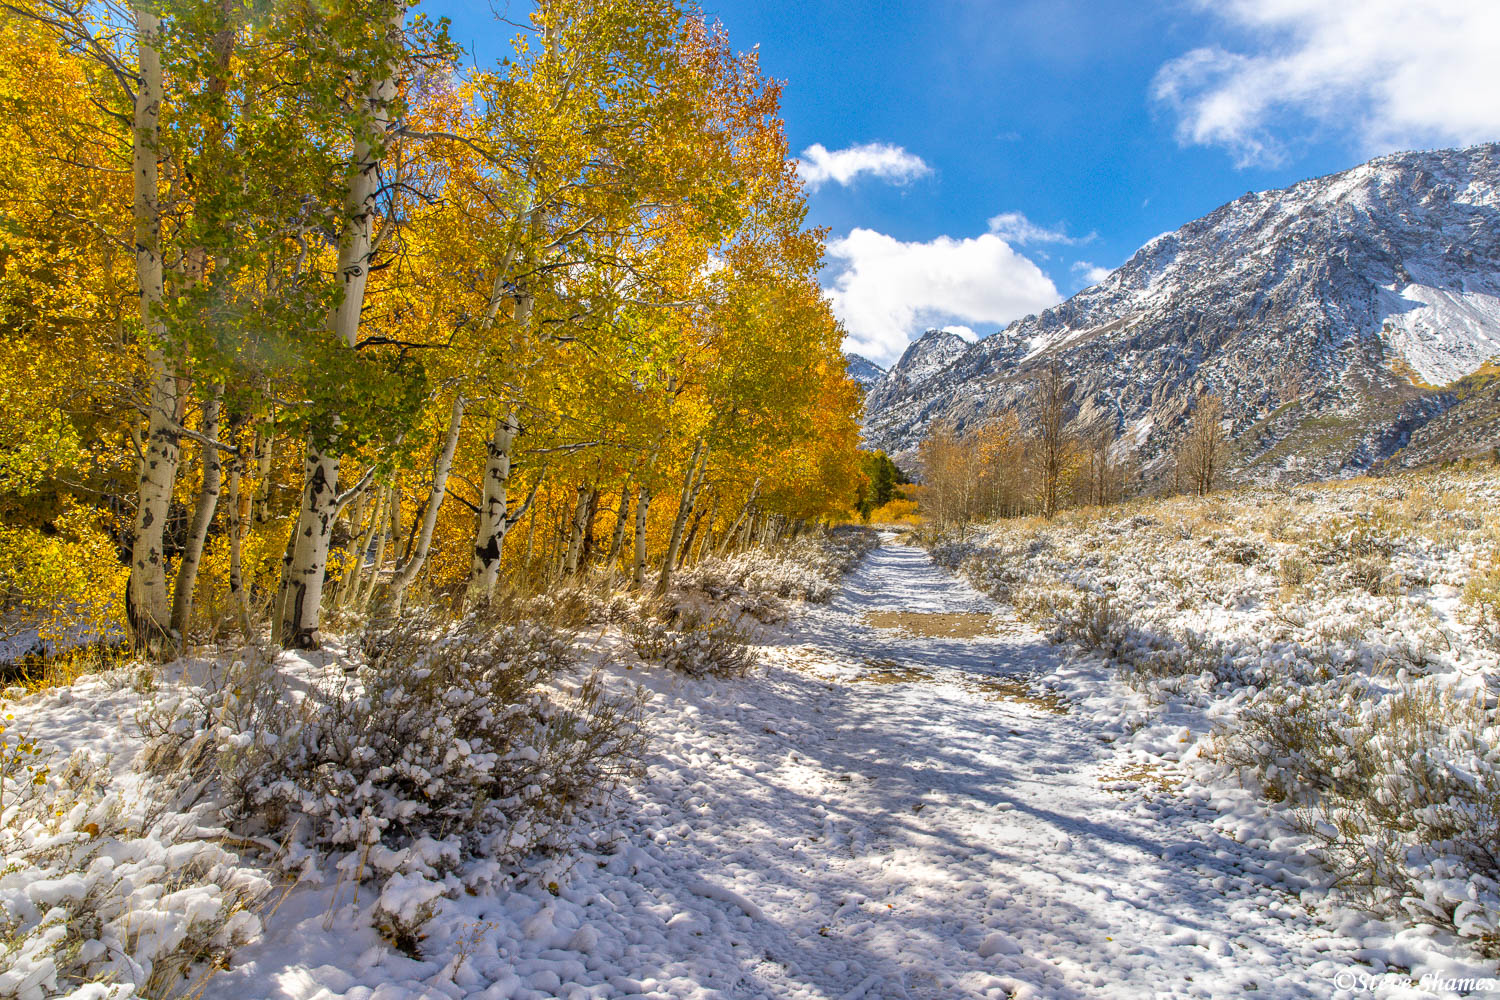 June Lake Loop in Mono County is ground zero for fall colors in California.